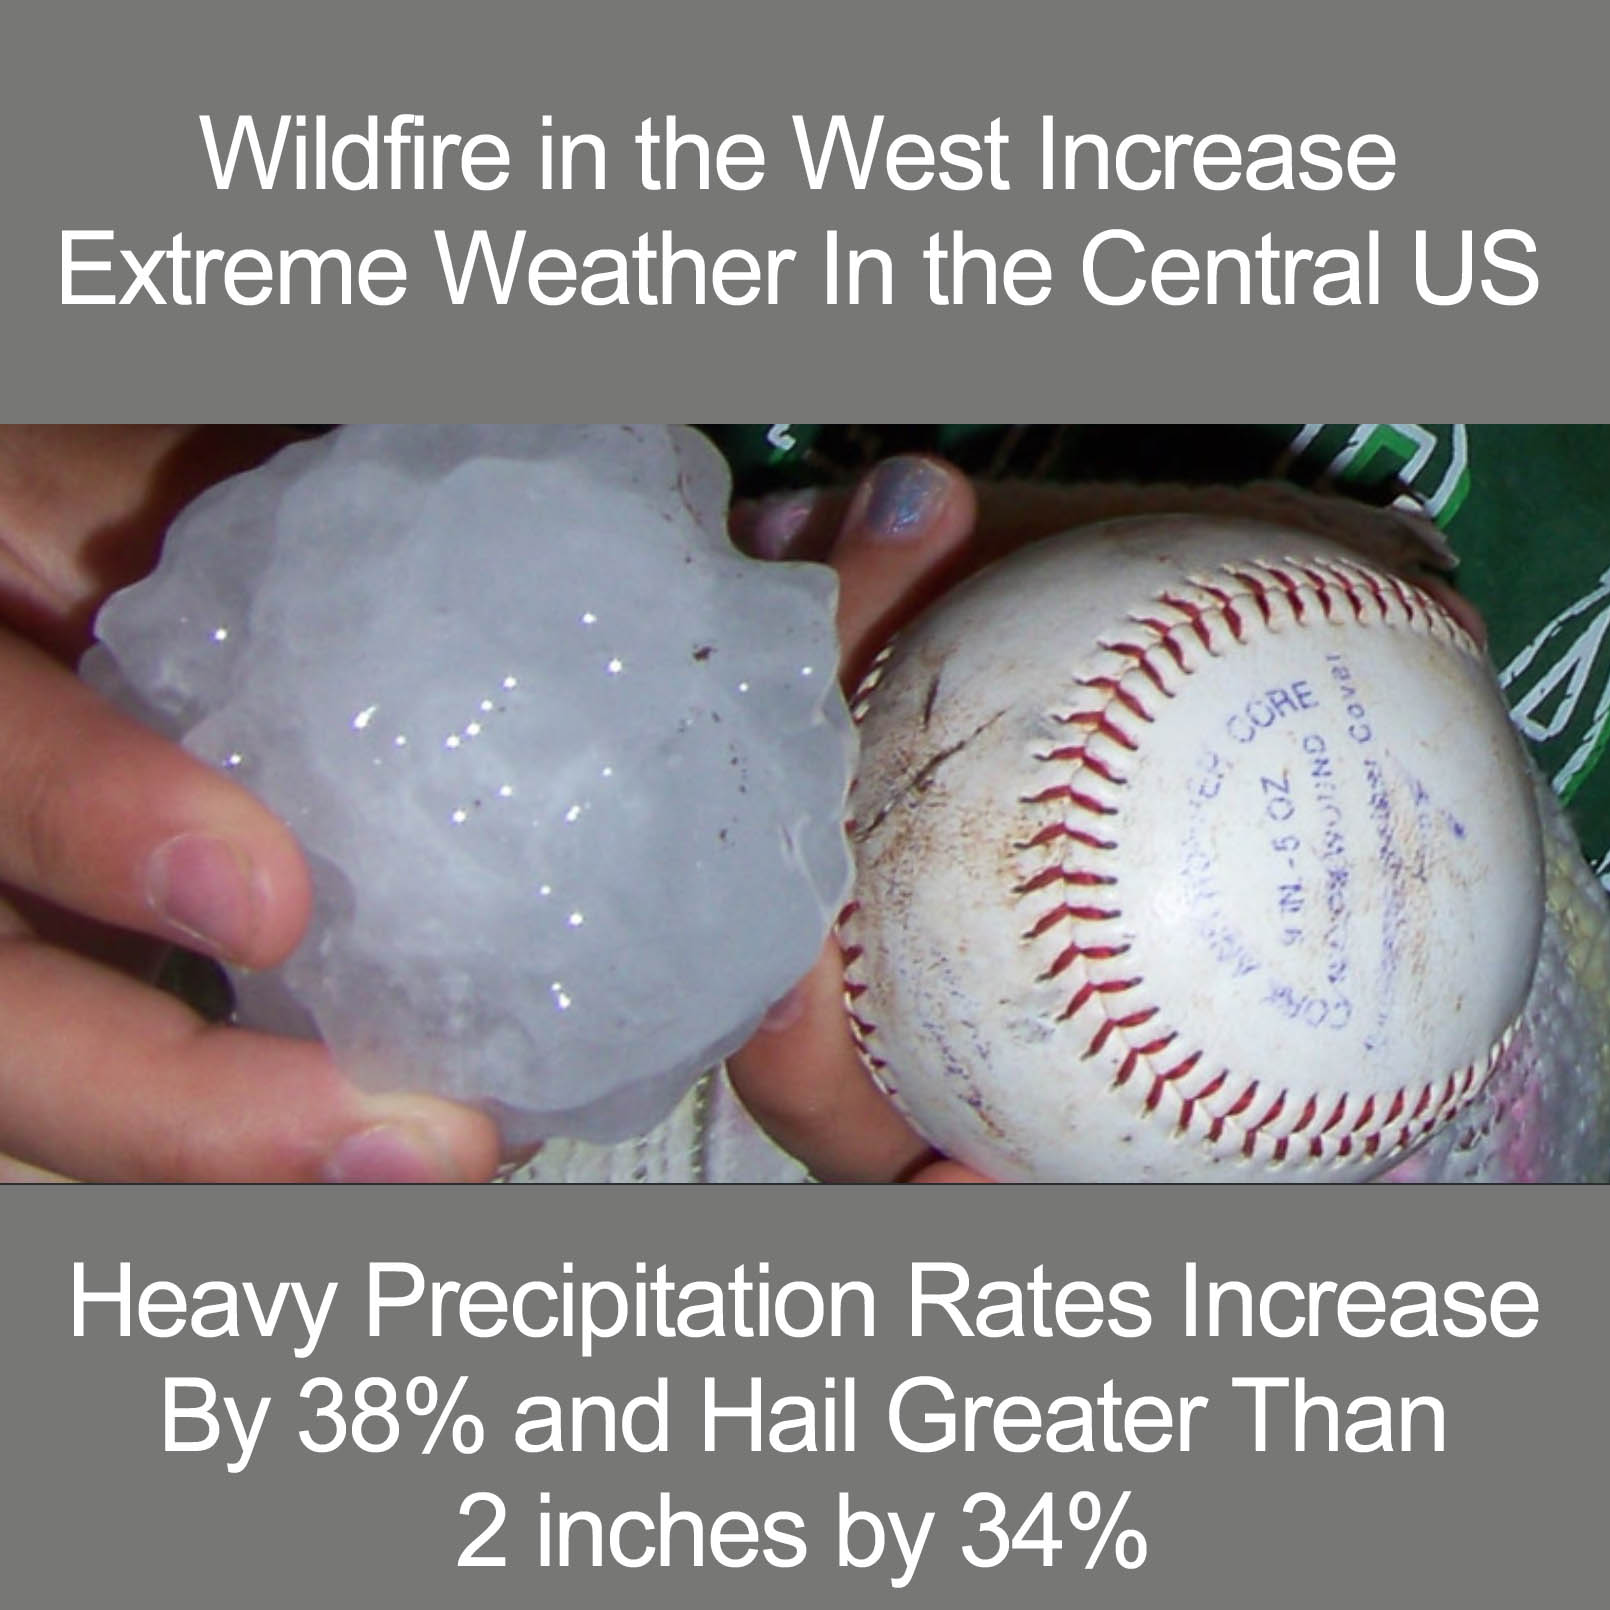 Western Wildfire Increases Hail and Heavy Rain in Central US